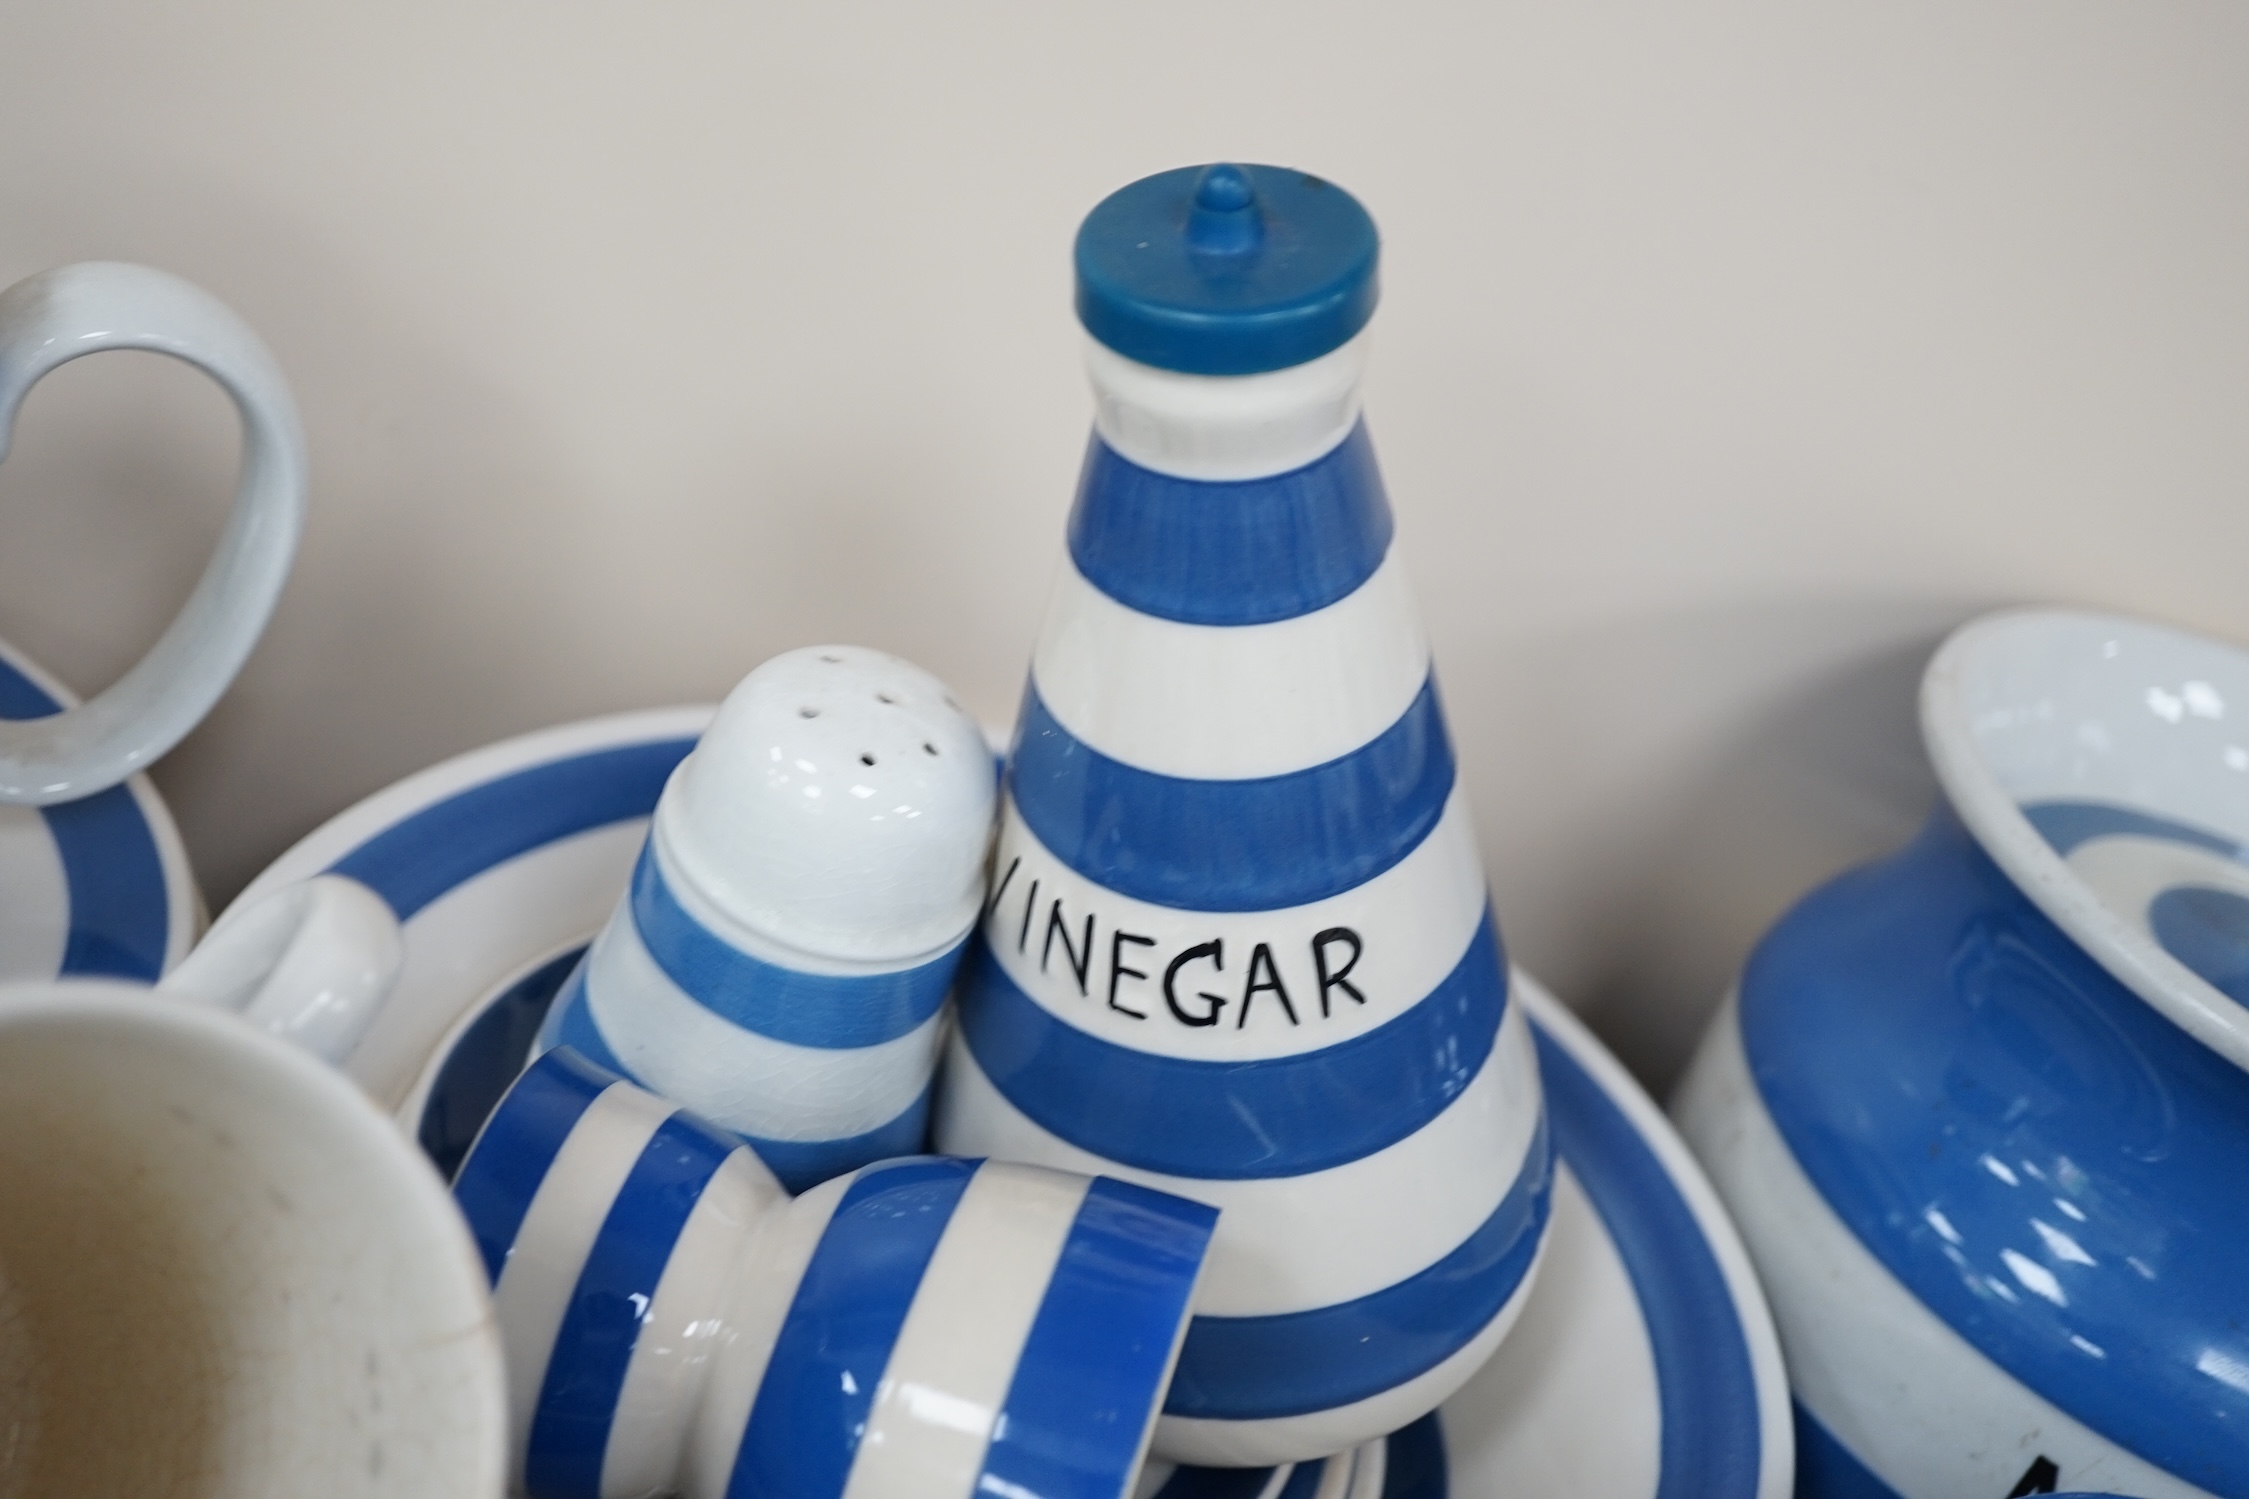 A quantity of unmarked and non T.G.Green blue and white Cornishware to include a Mincemeat jar and cover, egg cups, bowls, dishes and sifters, approximately eighty pieces. Condition - fair to good